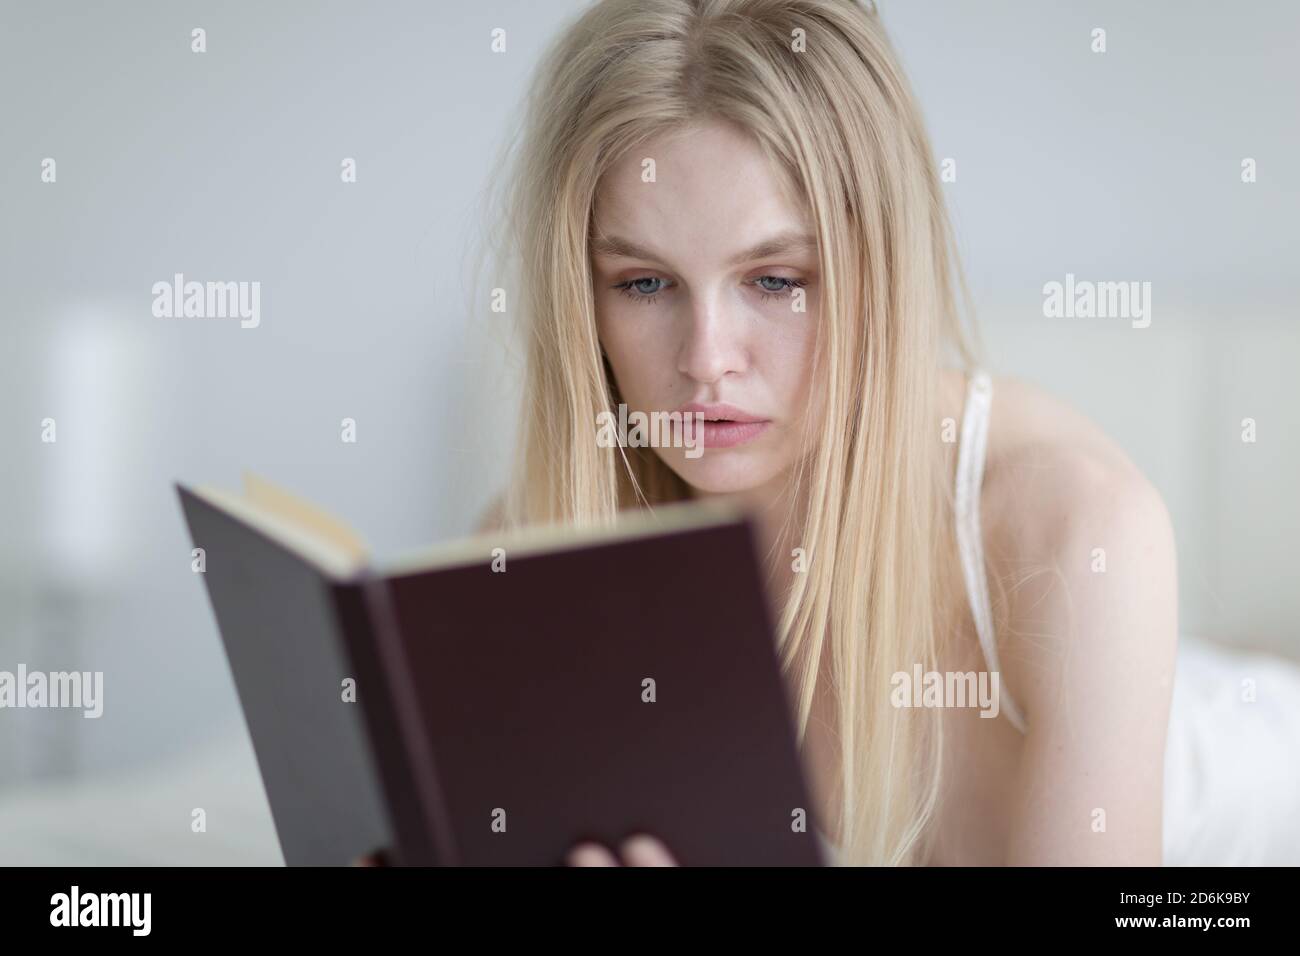 Focused young woman reading a book in bed during morning. Stock Photo